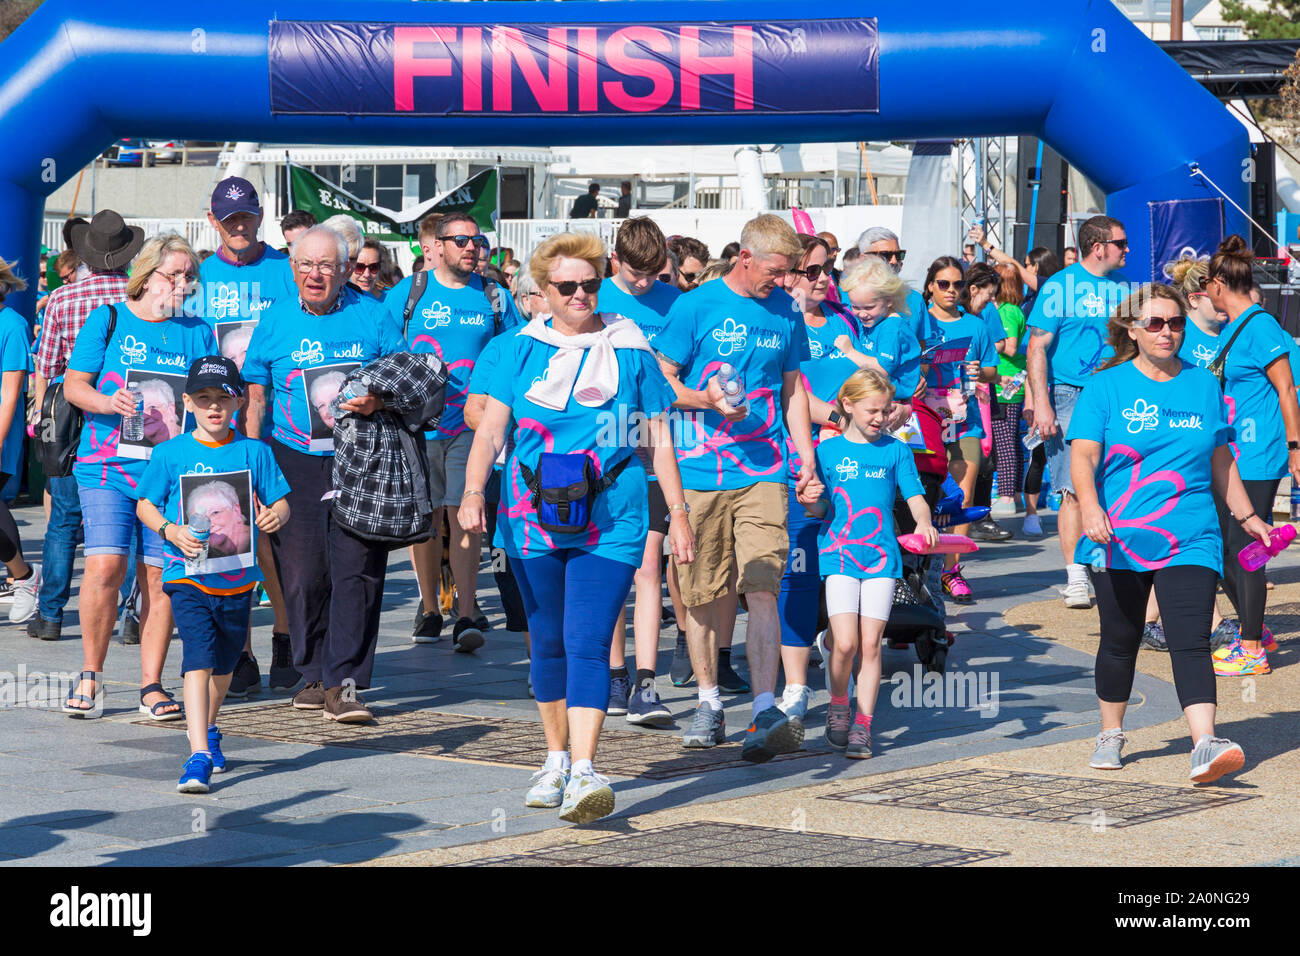 Bournemouth, Dorset UK. 21st September 2019. Supporters take part in the Alzheimer's Society Memory Walk in Bournemouth on a hot sunny day raising funds for vital dementia research, campaigns and support services. They can reflect on who they are walking for by leaving a message on the Memory Tree and watching it blossom throughout the day. Credit: Carolyn Jenkins/Alamy Live News Stock Photo